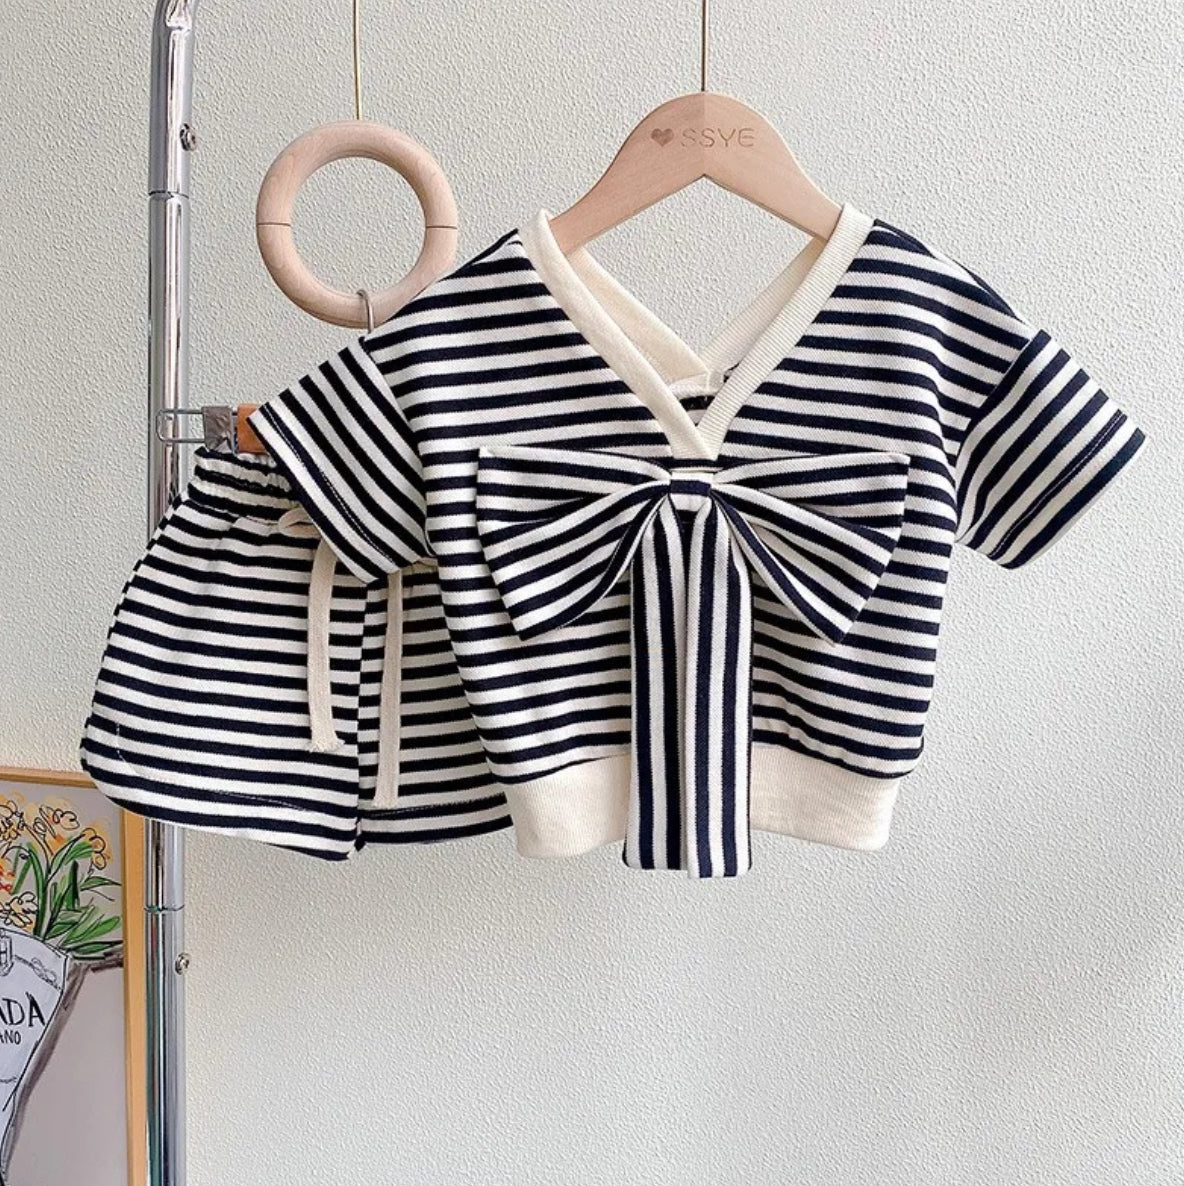 Girls V- neck set Black and White striped and bow shirt and short